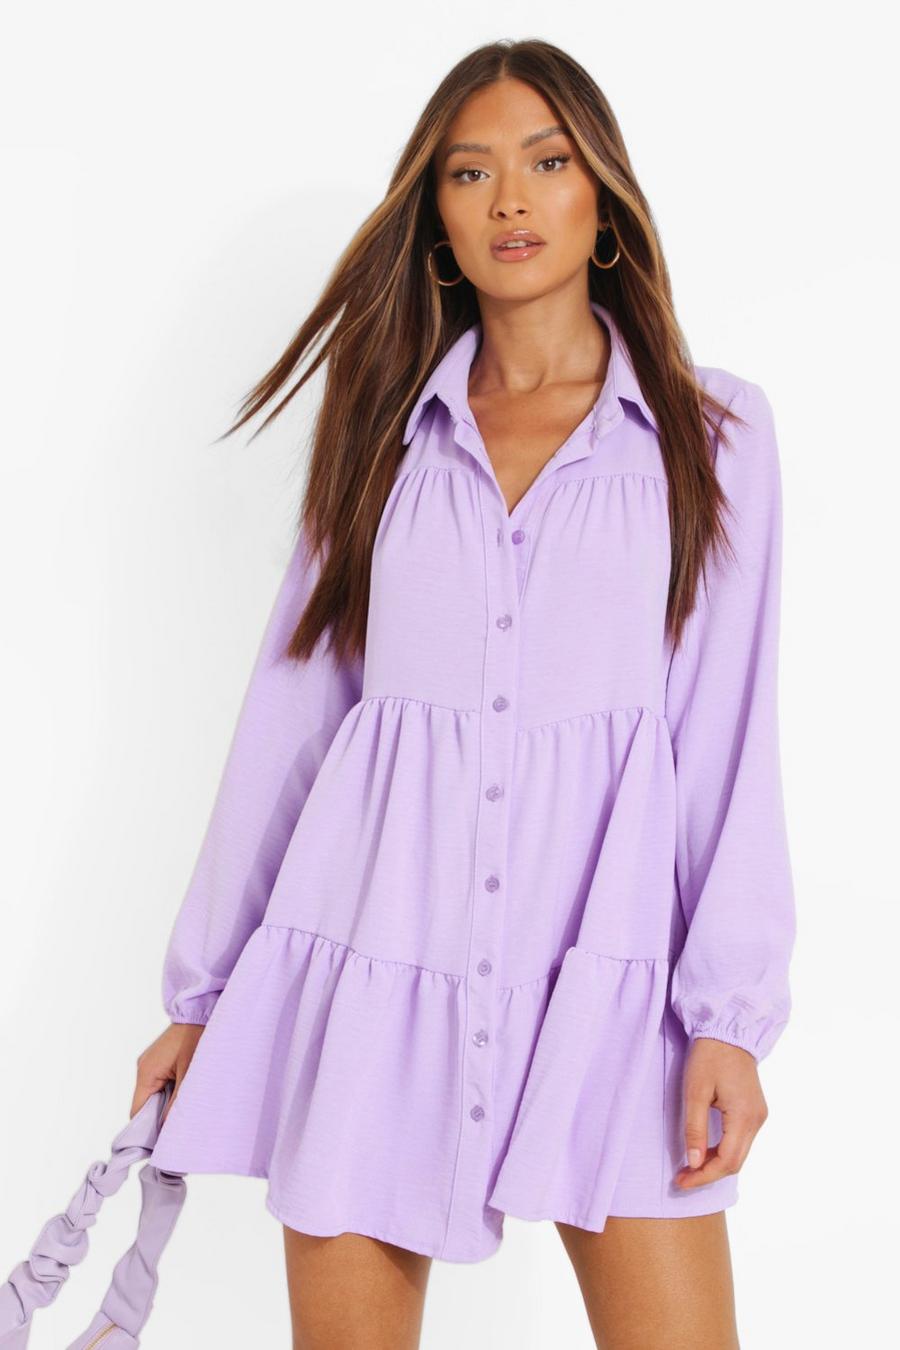 Purple & Lilac Tops For Women